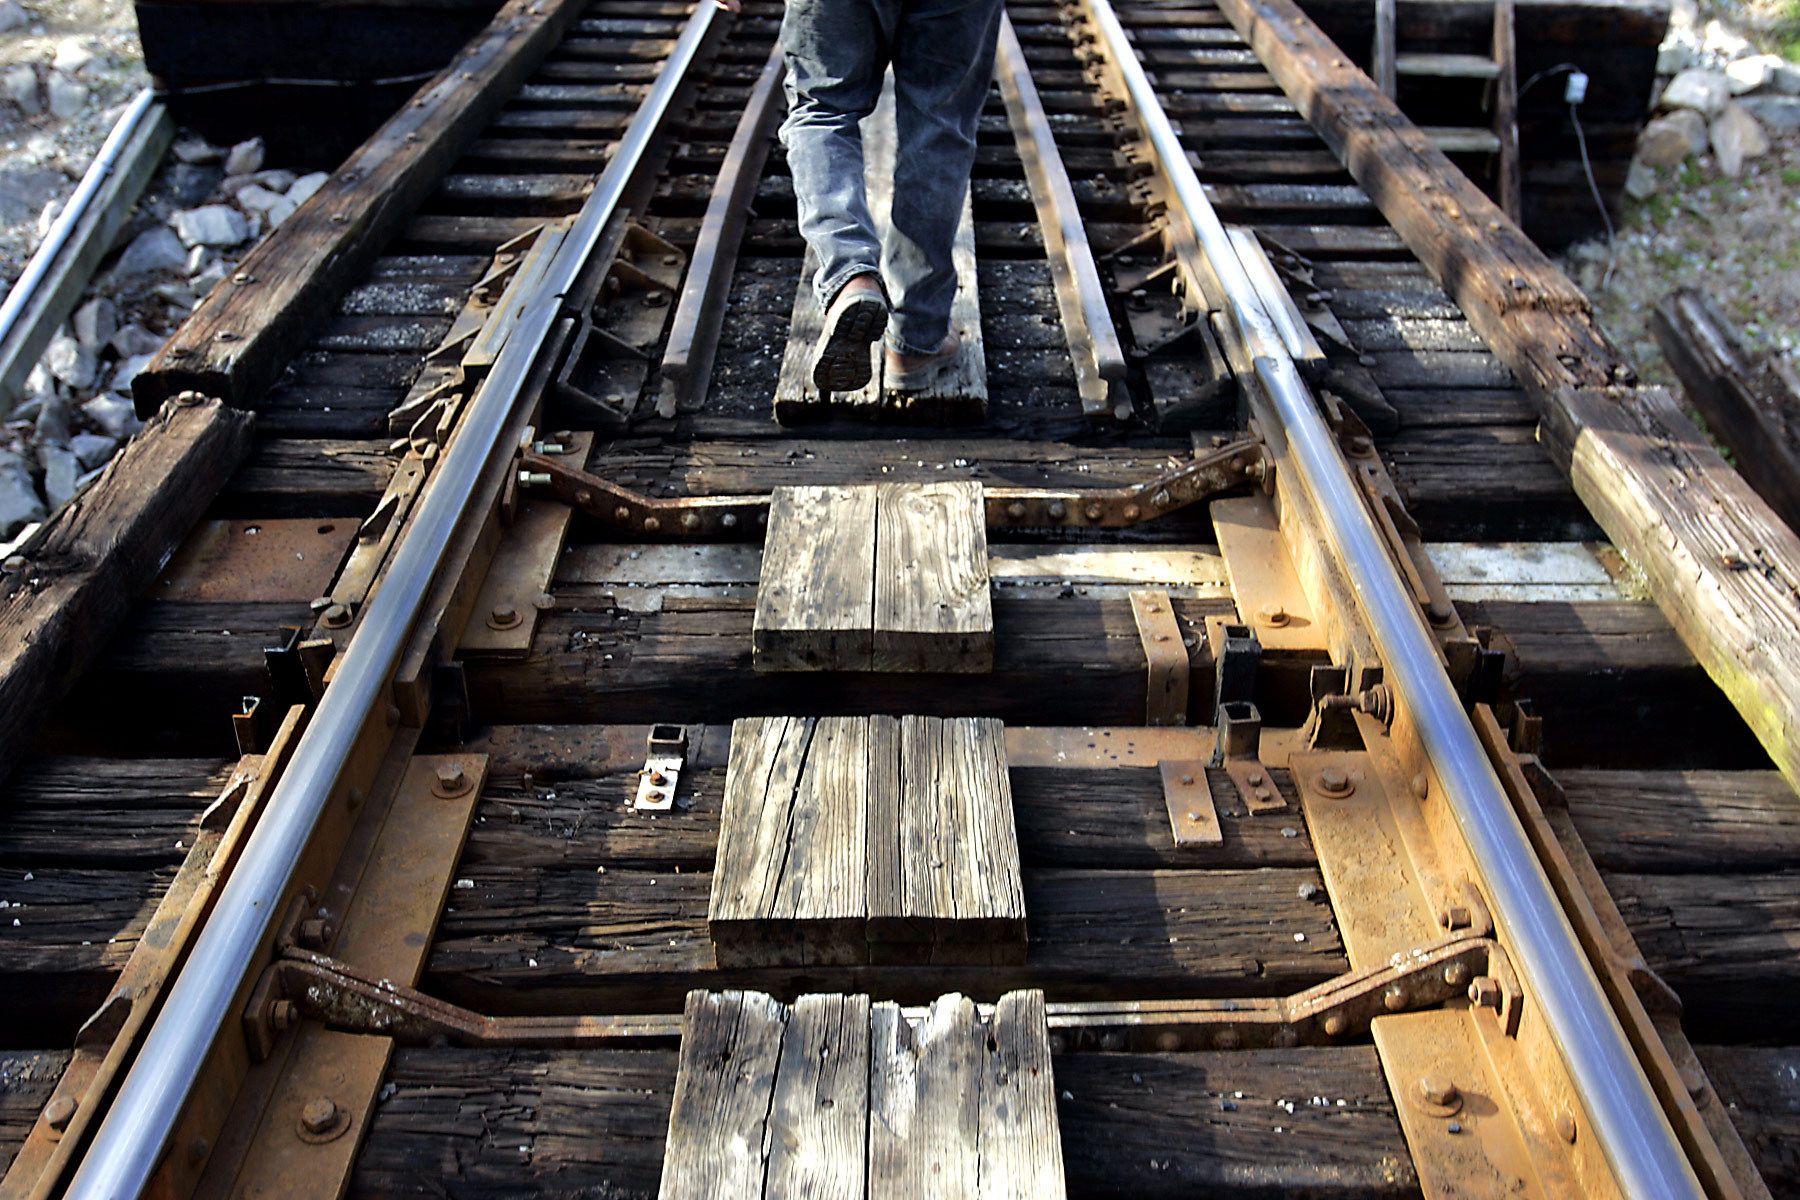 Conductor Jerry Stevens walks the foot path while checking the connections of the Waccamaw River Swing Bridge before a train's crossing to Myrtle Beach. The Conway Southern Railroad is the only trainline in the Grand Strand.